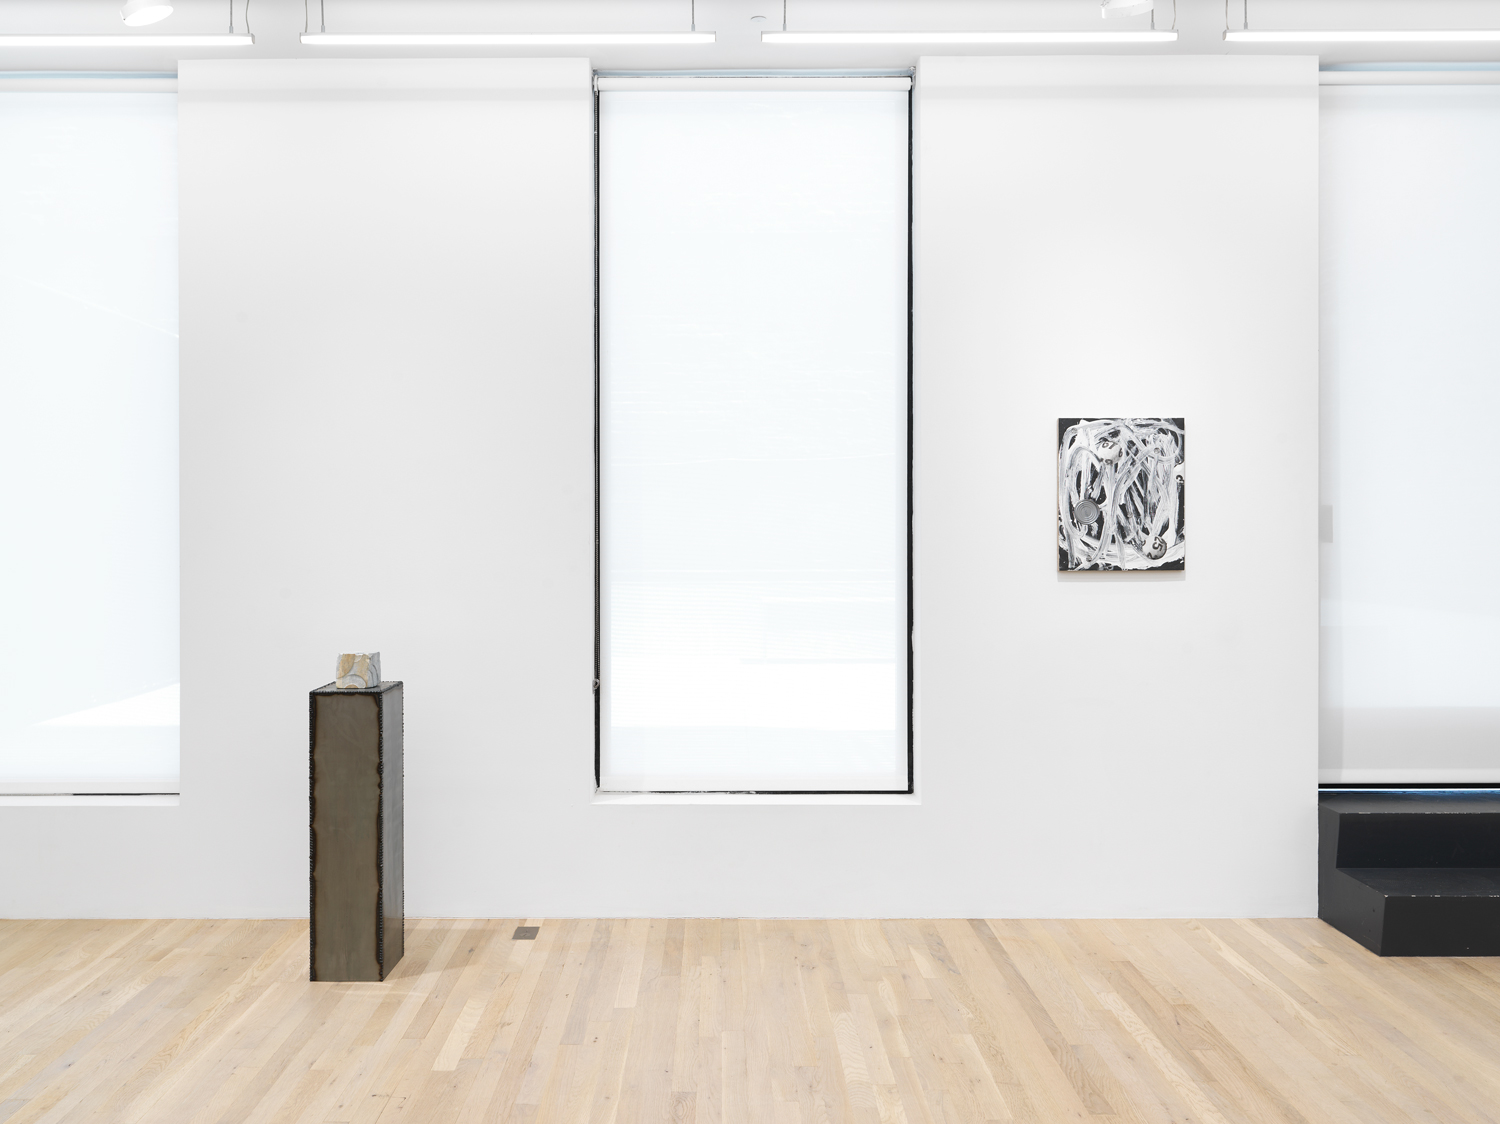 Installation view, Viewing Room I: Alex Kwartler, Tiril Hasselknippe, Jane Swavely, Magenta Plains, New York, NY 2023.